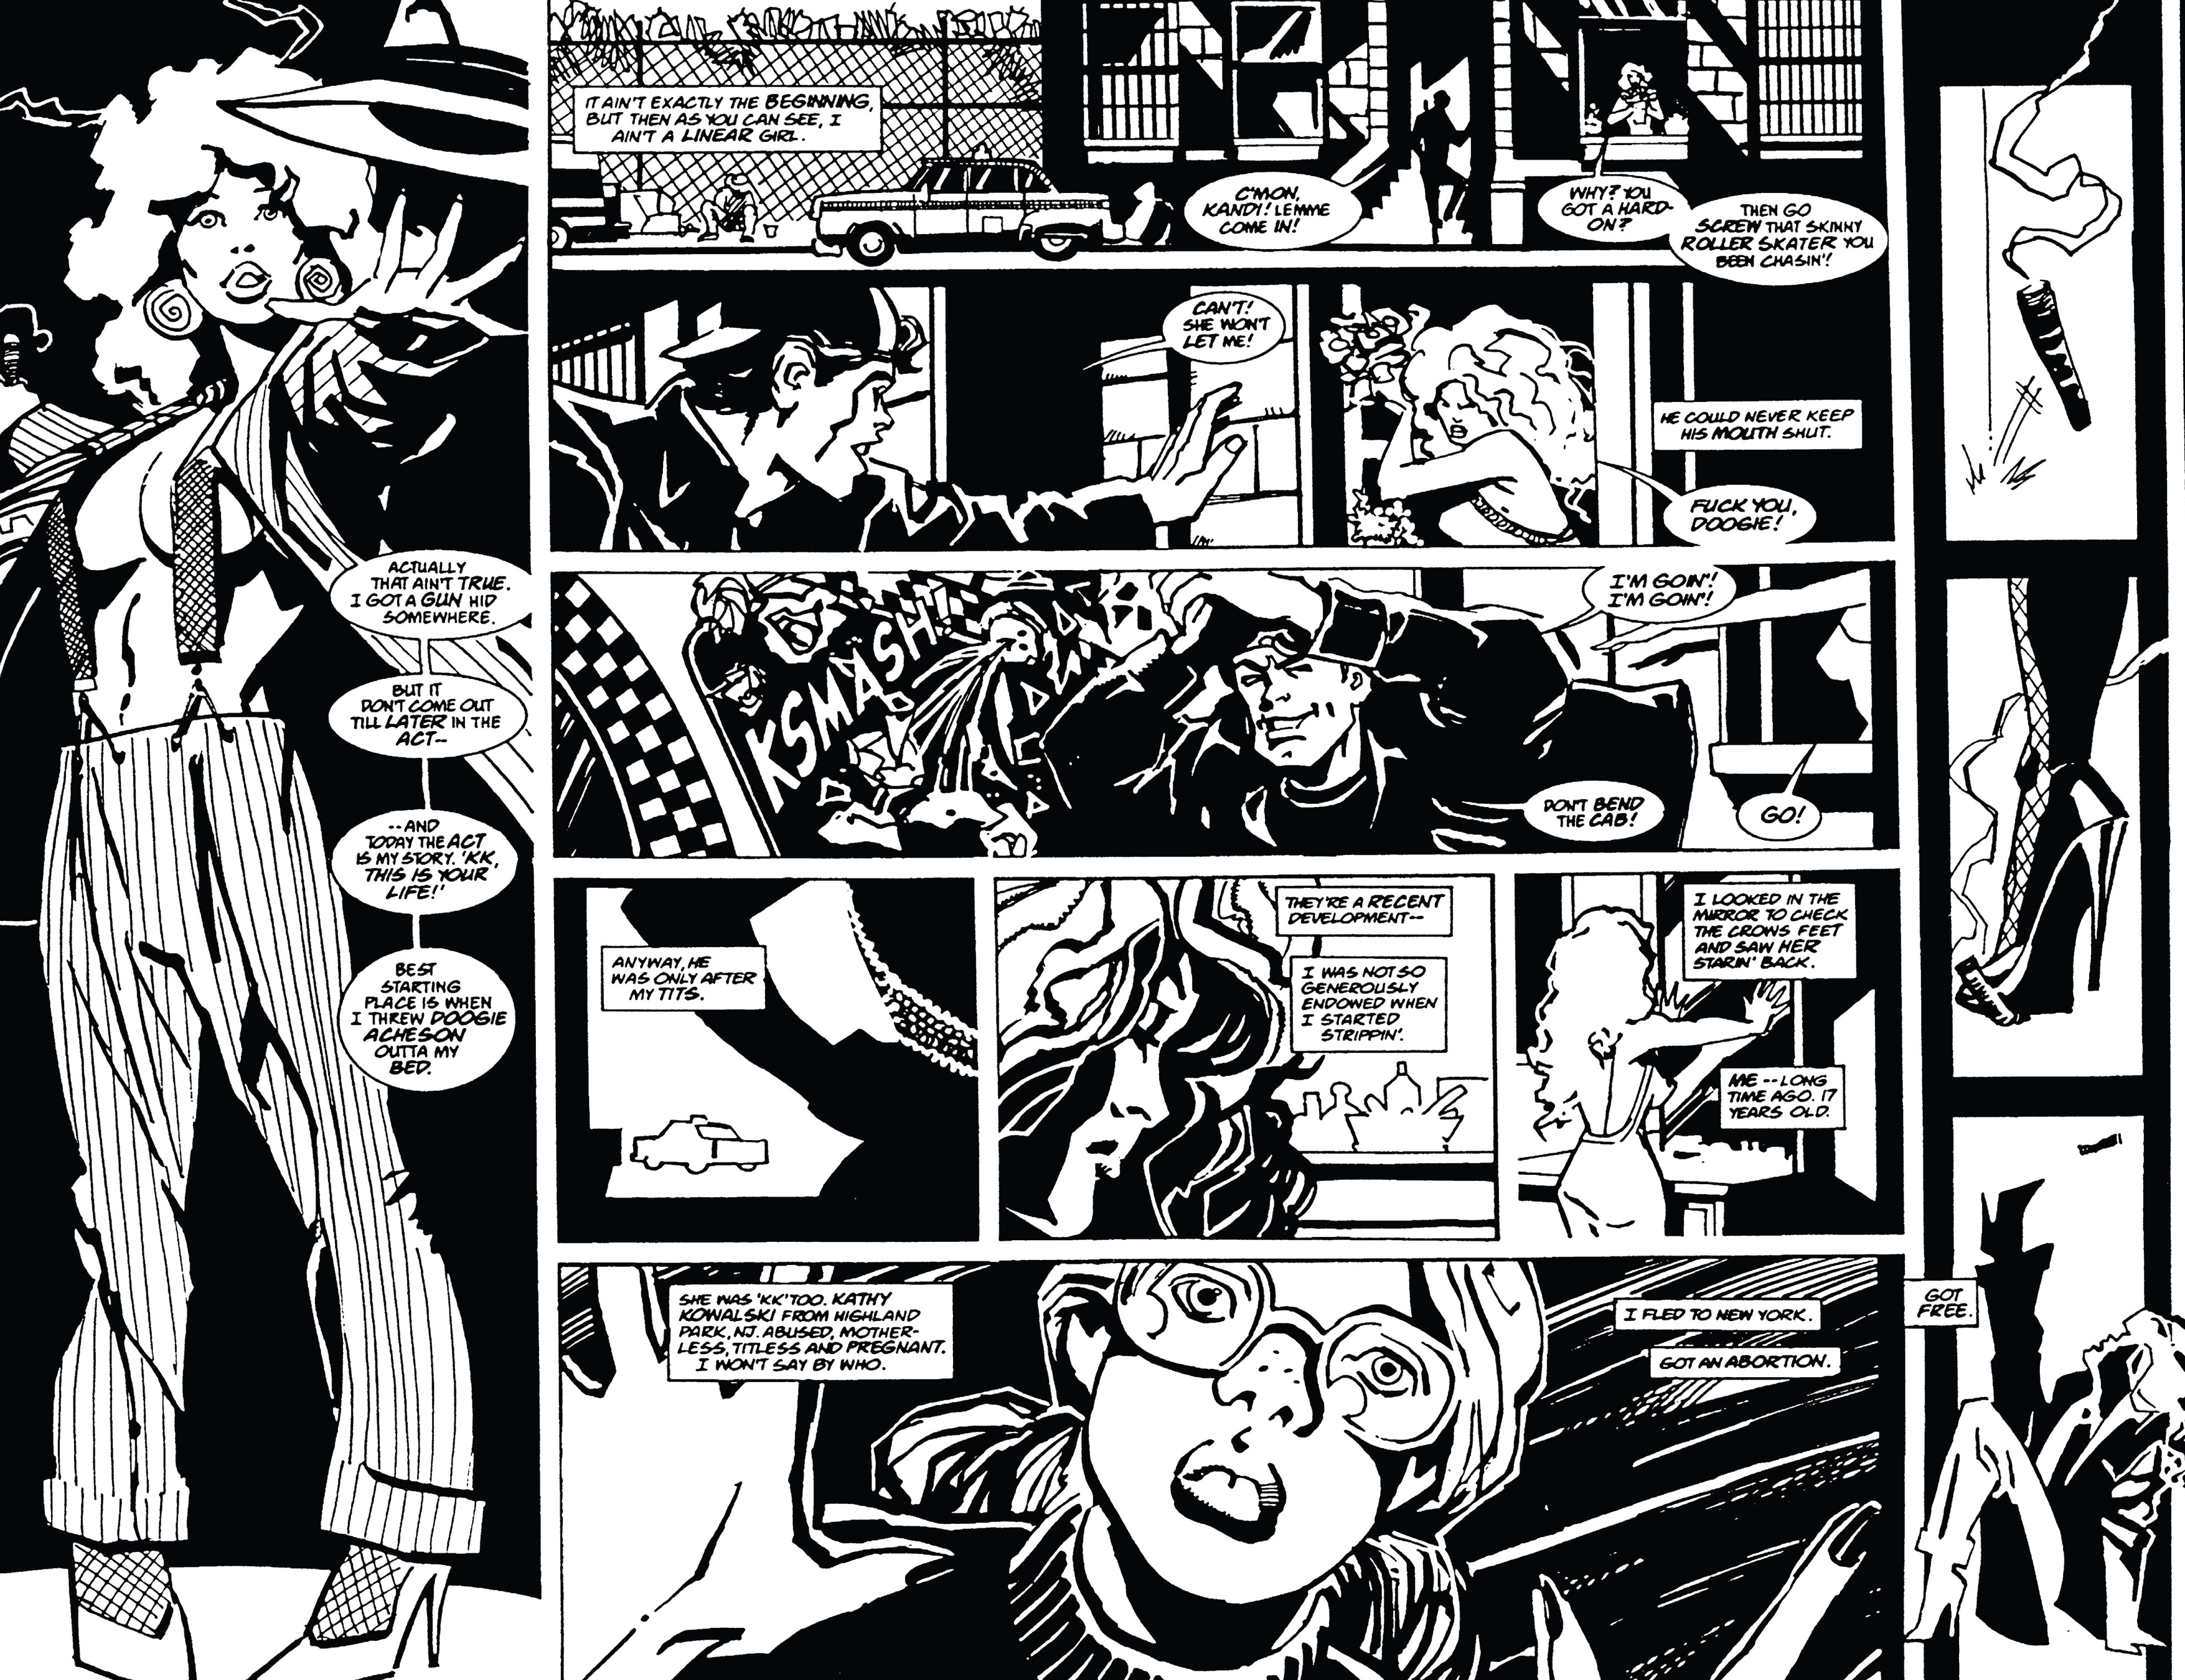 Read online Armed and Dangerous Special comic -  Issue # Full - 3